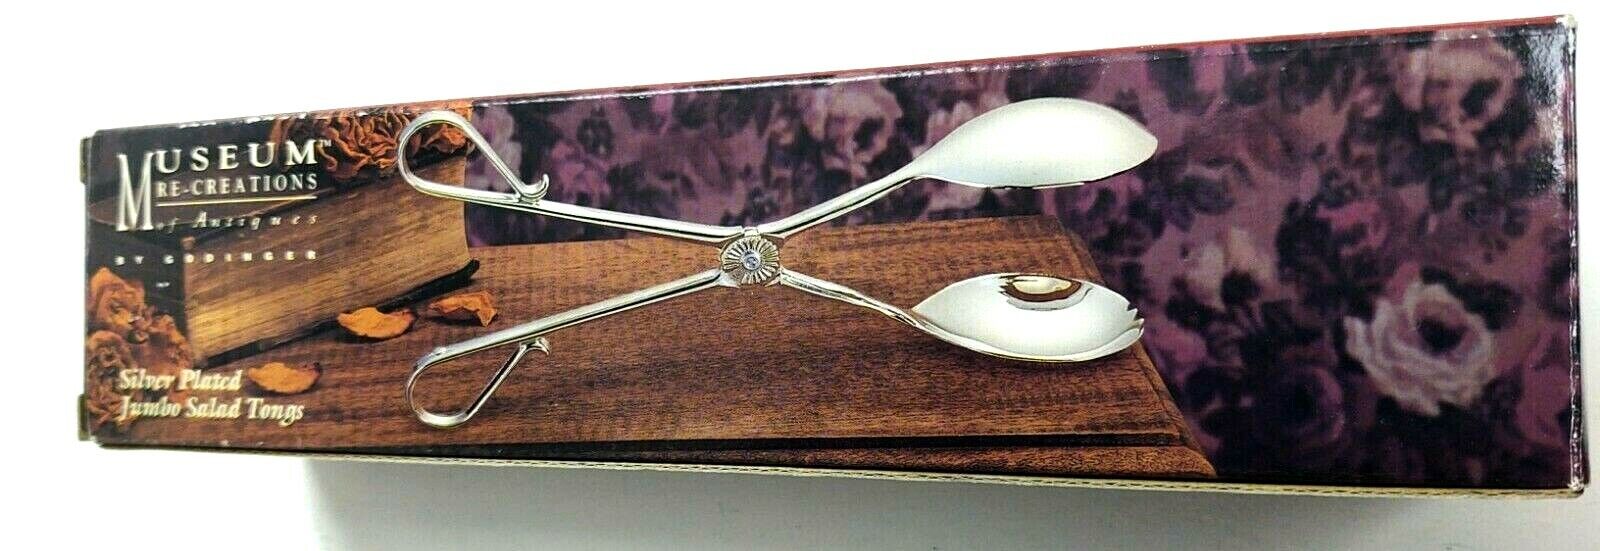 Museum Re-Creations by Godinger Silver Plated Jumbo Salad Tongs